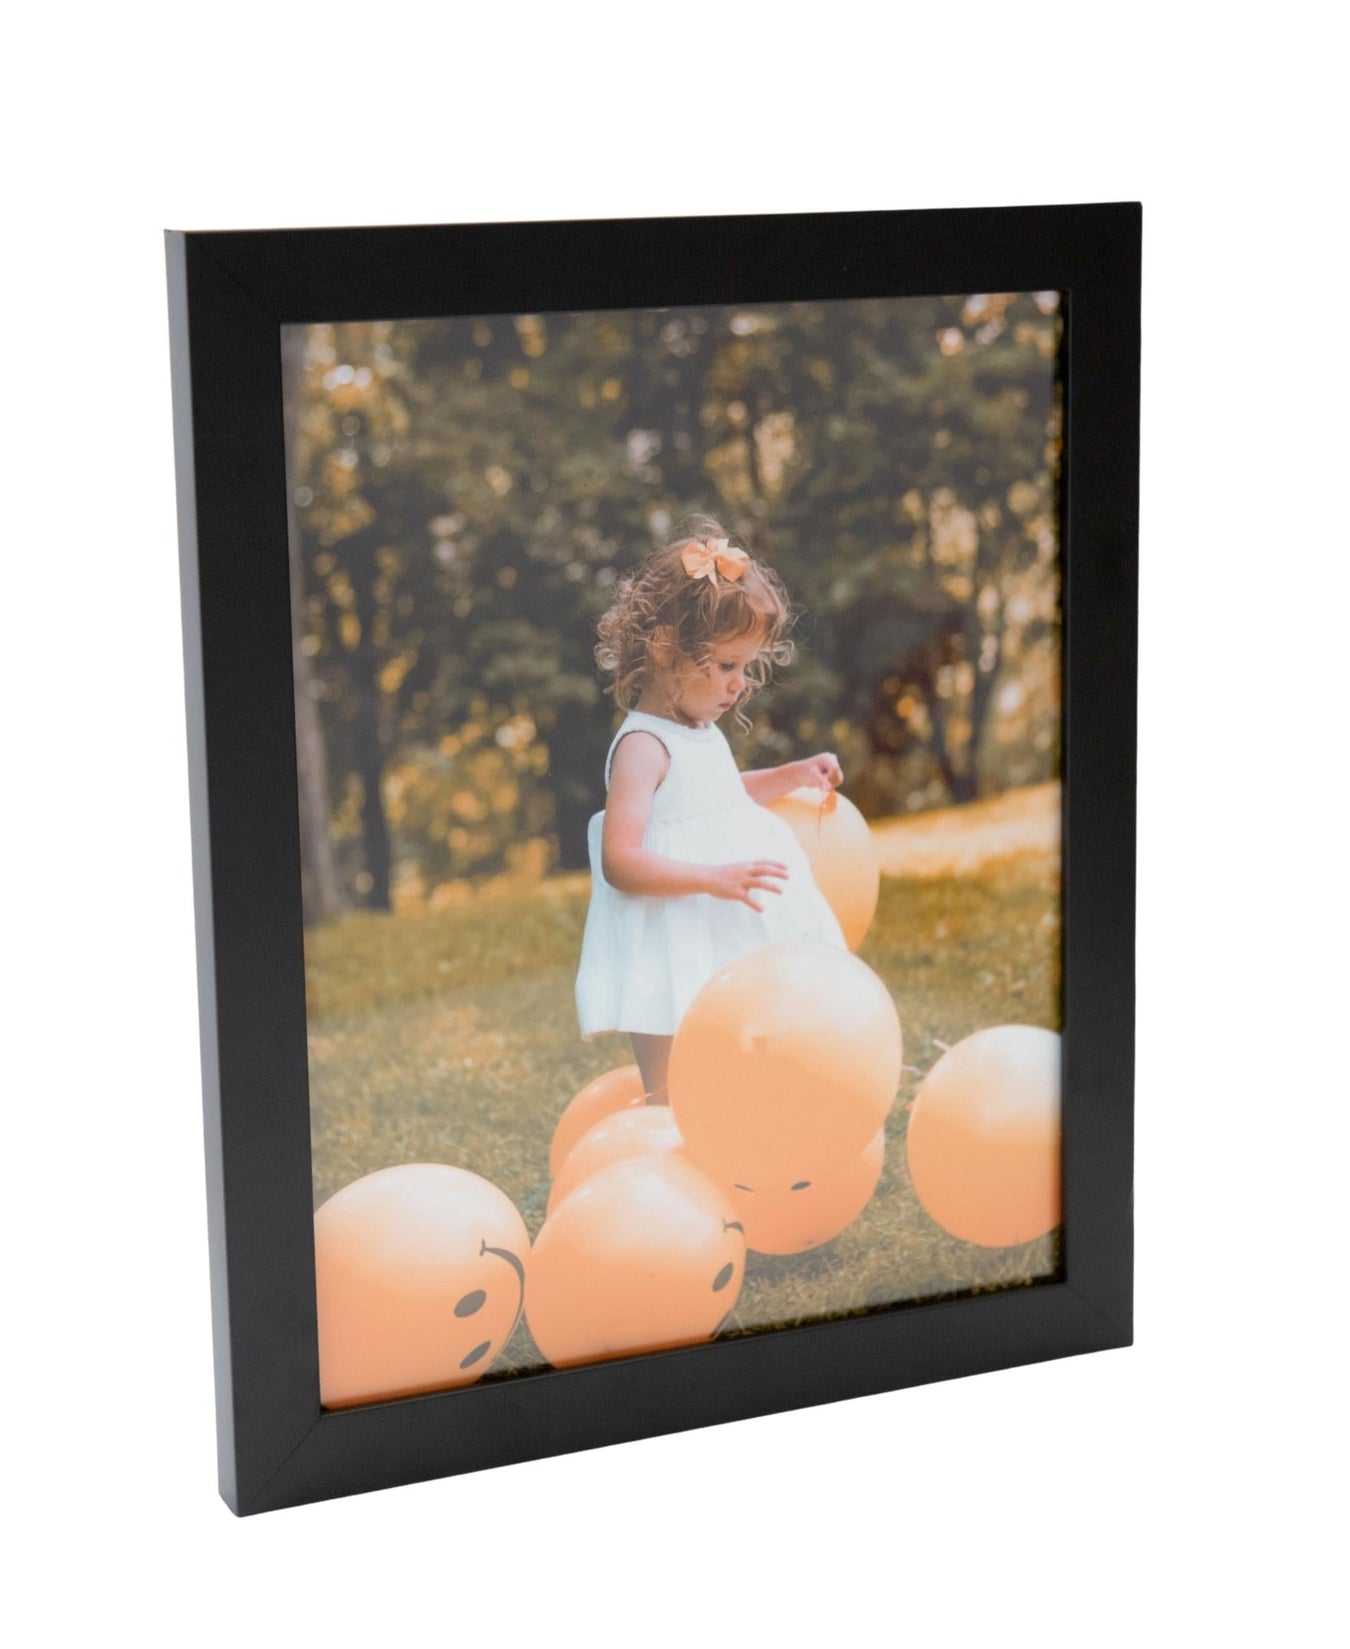 16x24 Picture frames Gallery Wall 16 x 24 Poster frame - Modern Memory Design Picture frames - New Jersey Frame Shop Custom Framing